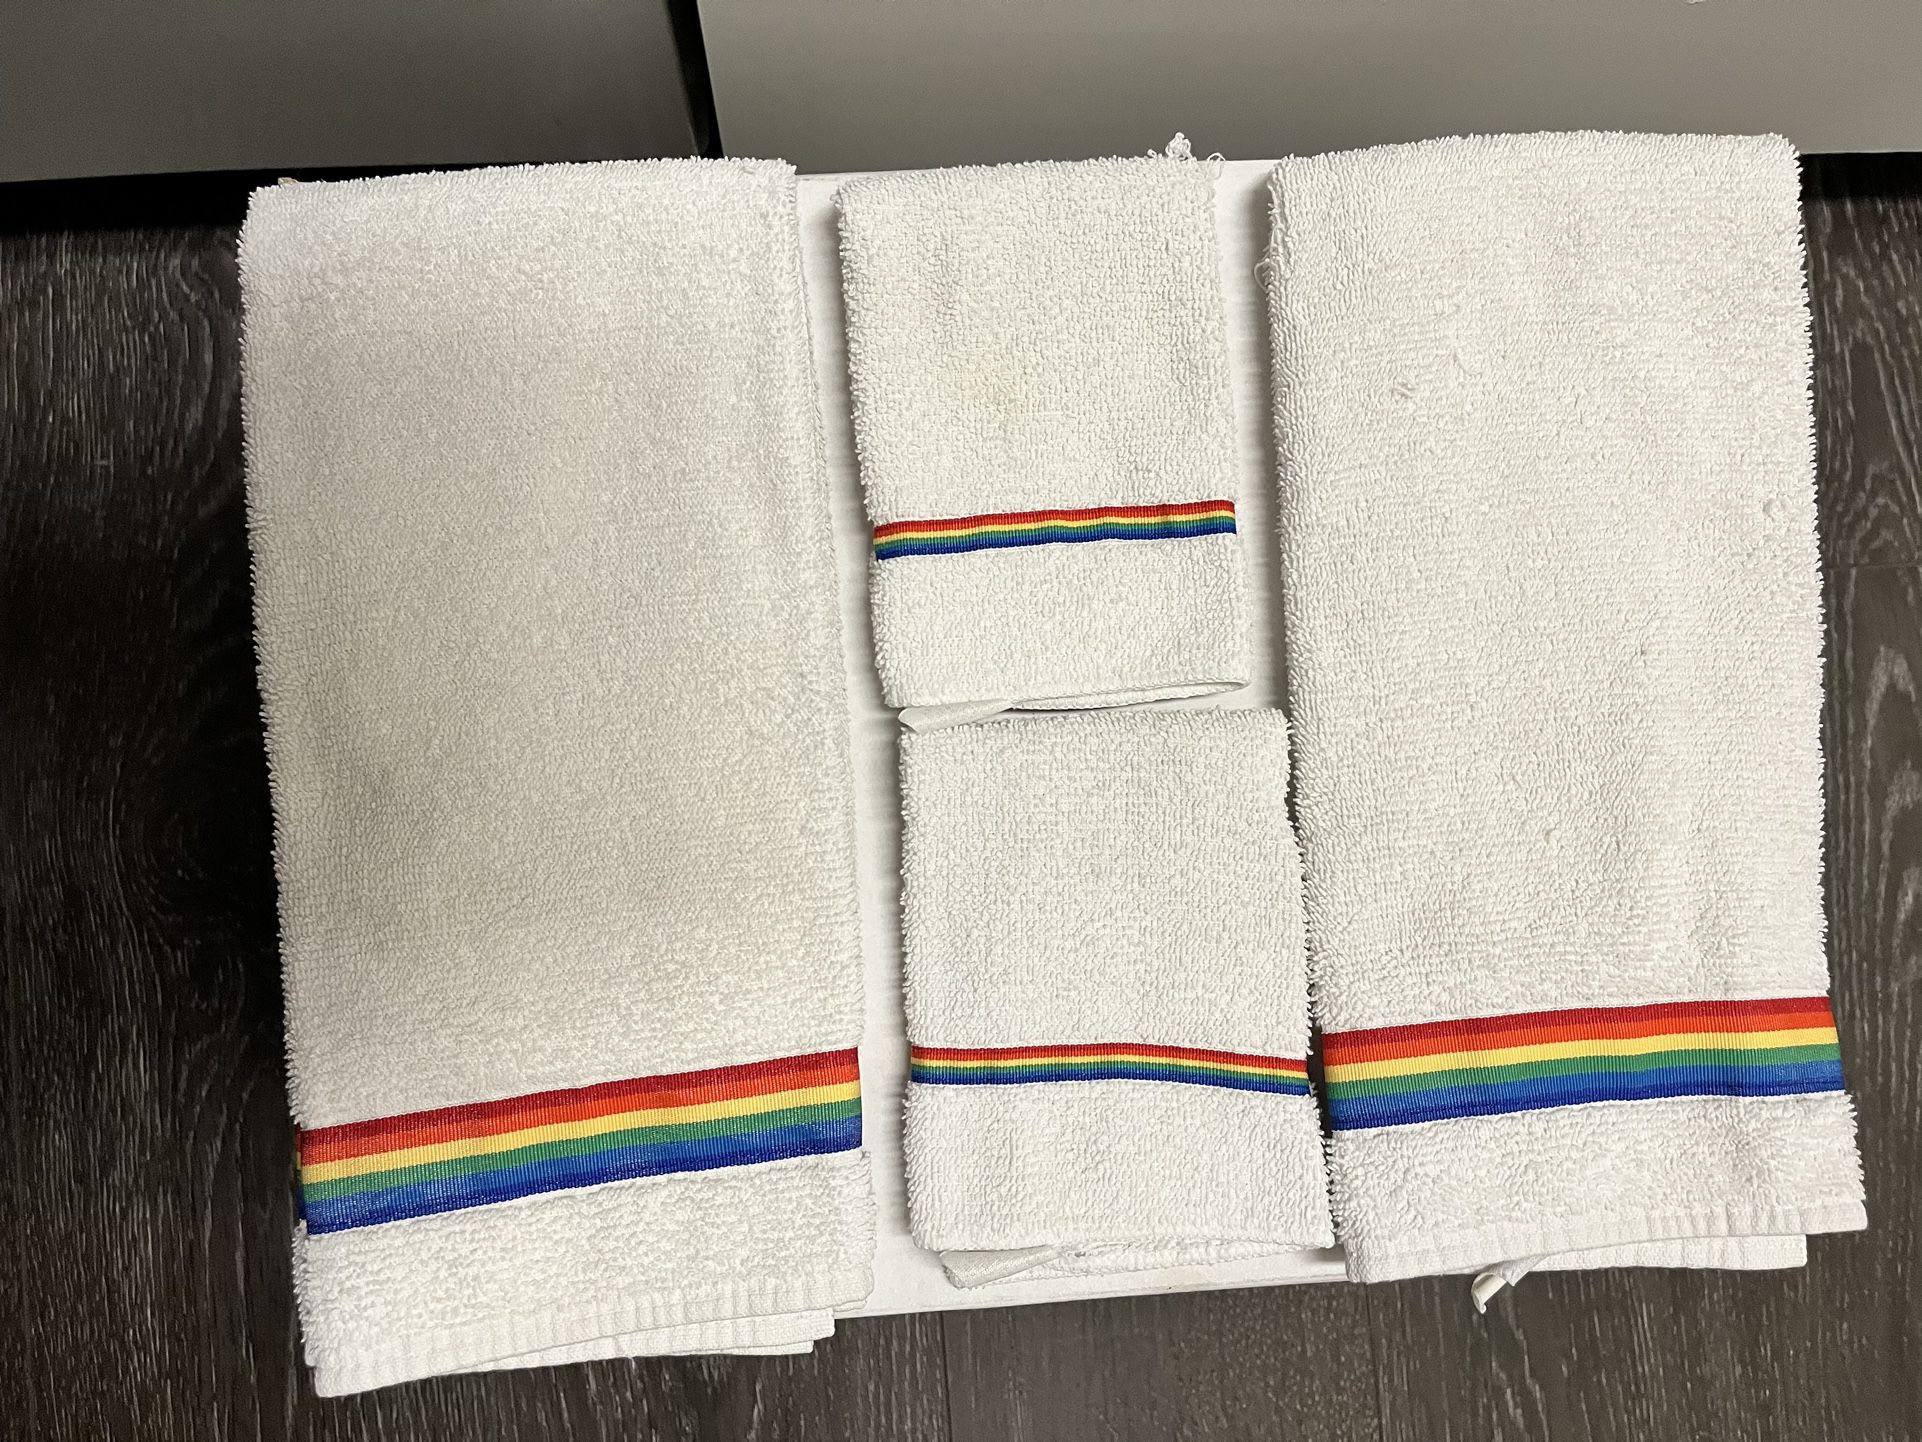 (2) - Rainbow - Hand Towels & (2) - washcloths    - $ 5 - For All 4